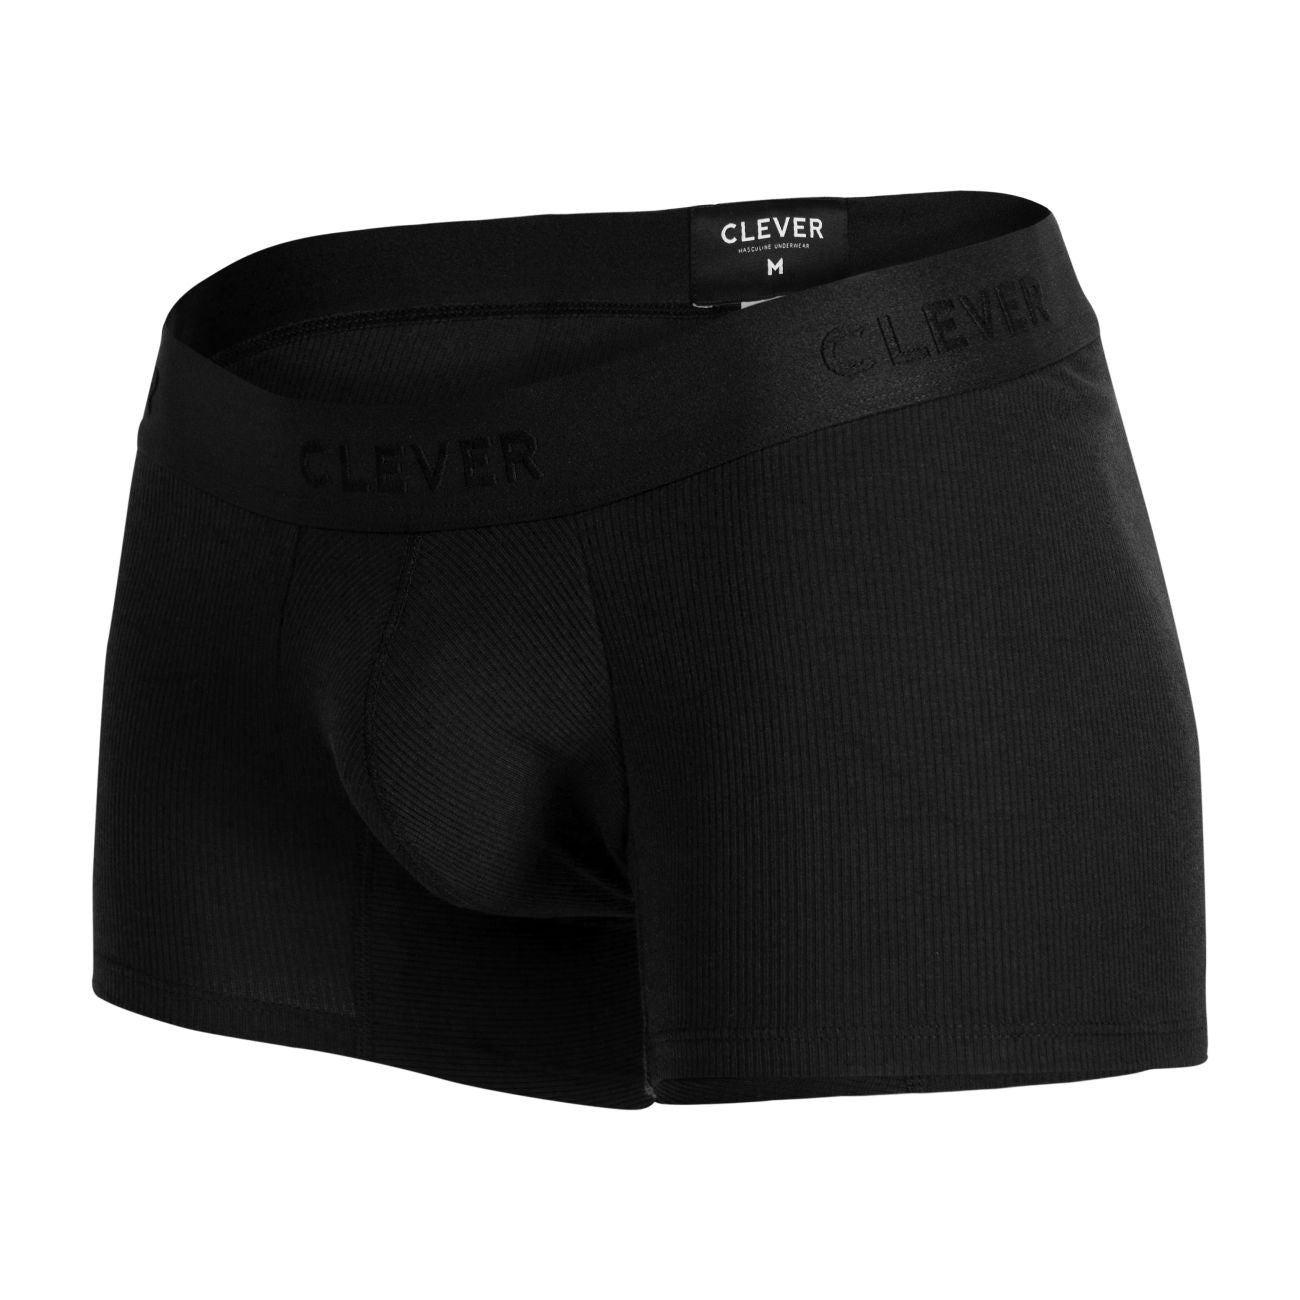 Clever 1471 Heavenly Trunks Black